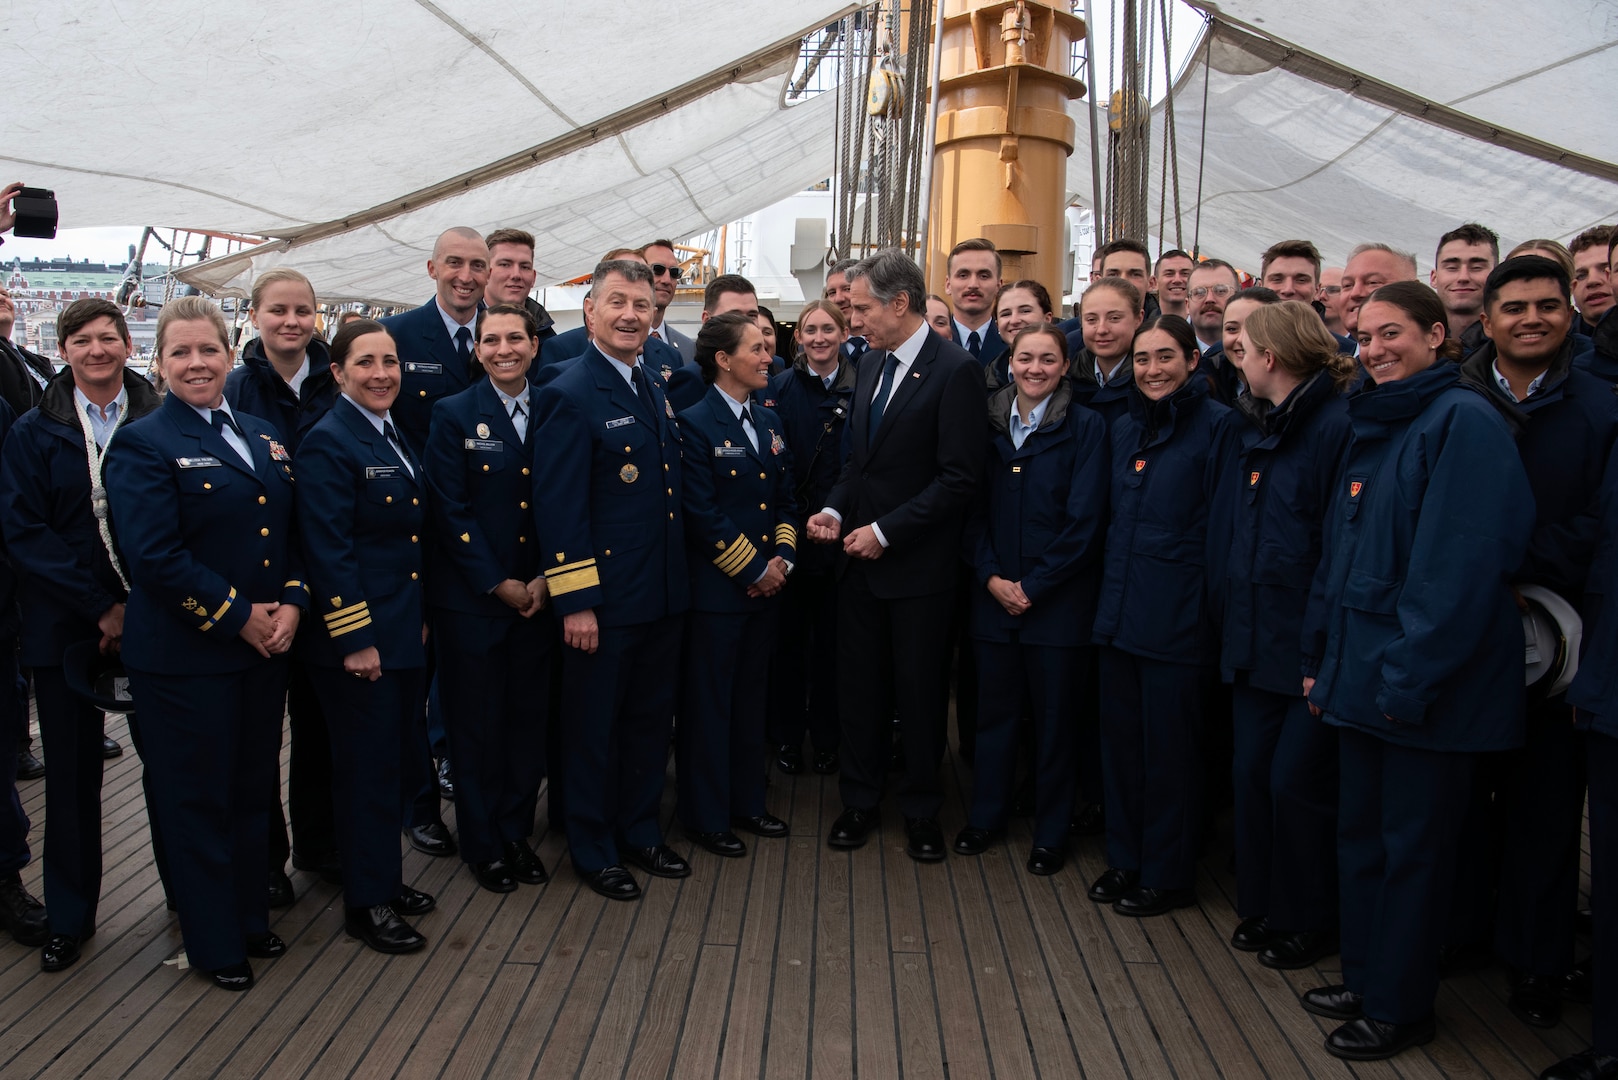 U.S. Secretary of State Antony Blinken, middle, takes a photo with the USCGC Eagle's (WIX) crew during a reception aboard the cutter, June 2, 2023, in Helsinki, Finland. Eagle is a tall ship used as a training platform for future Coast Guard Academy officers as well as a vessel utilized for establishing and maintaining domestic and international relationships. (U.S. Coast Guard photo by Petty Officer 3rd Class Carmen Caver)